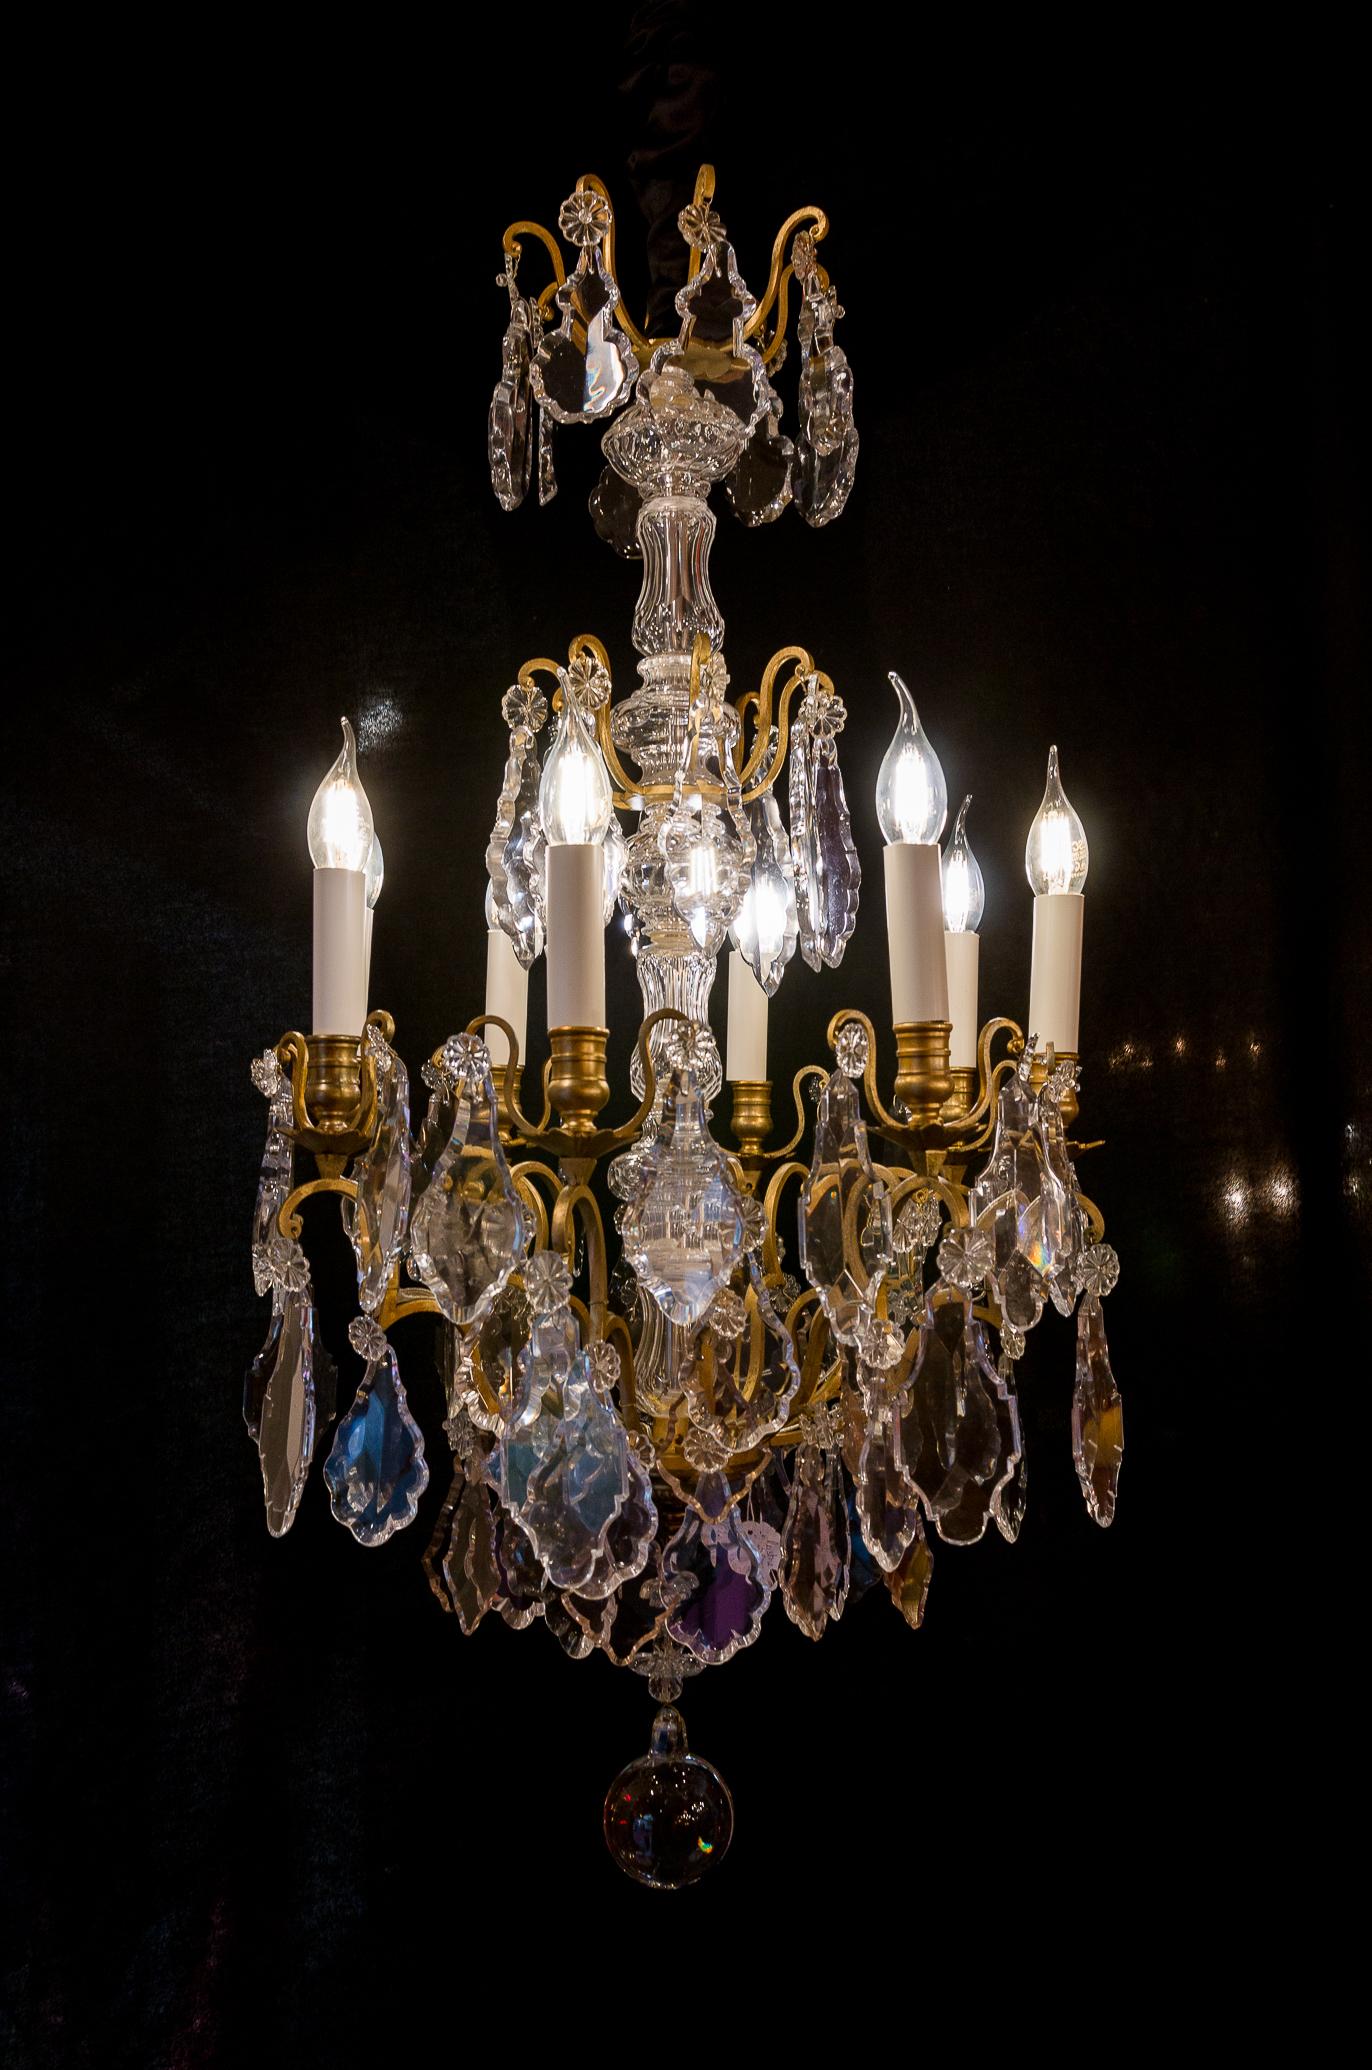 French Louis XVI style gilt bronze and crystal chandelier, circa 1890-1910

An elegant and decorative gilt bronze and cut crystal chandelier in the Classic French Louis XVI style, attributed to The Cristalleries De Baccarat.
Our chandelier is